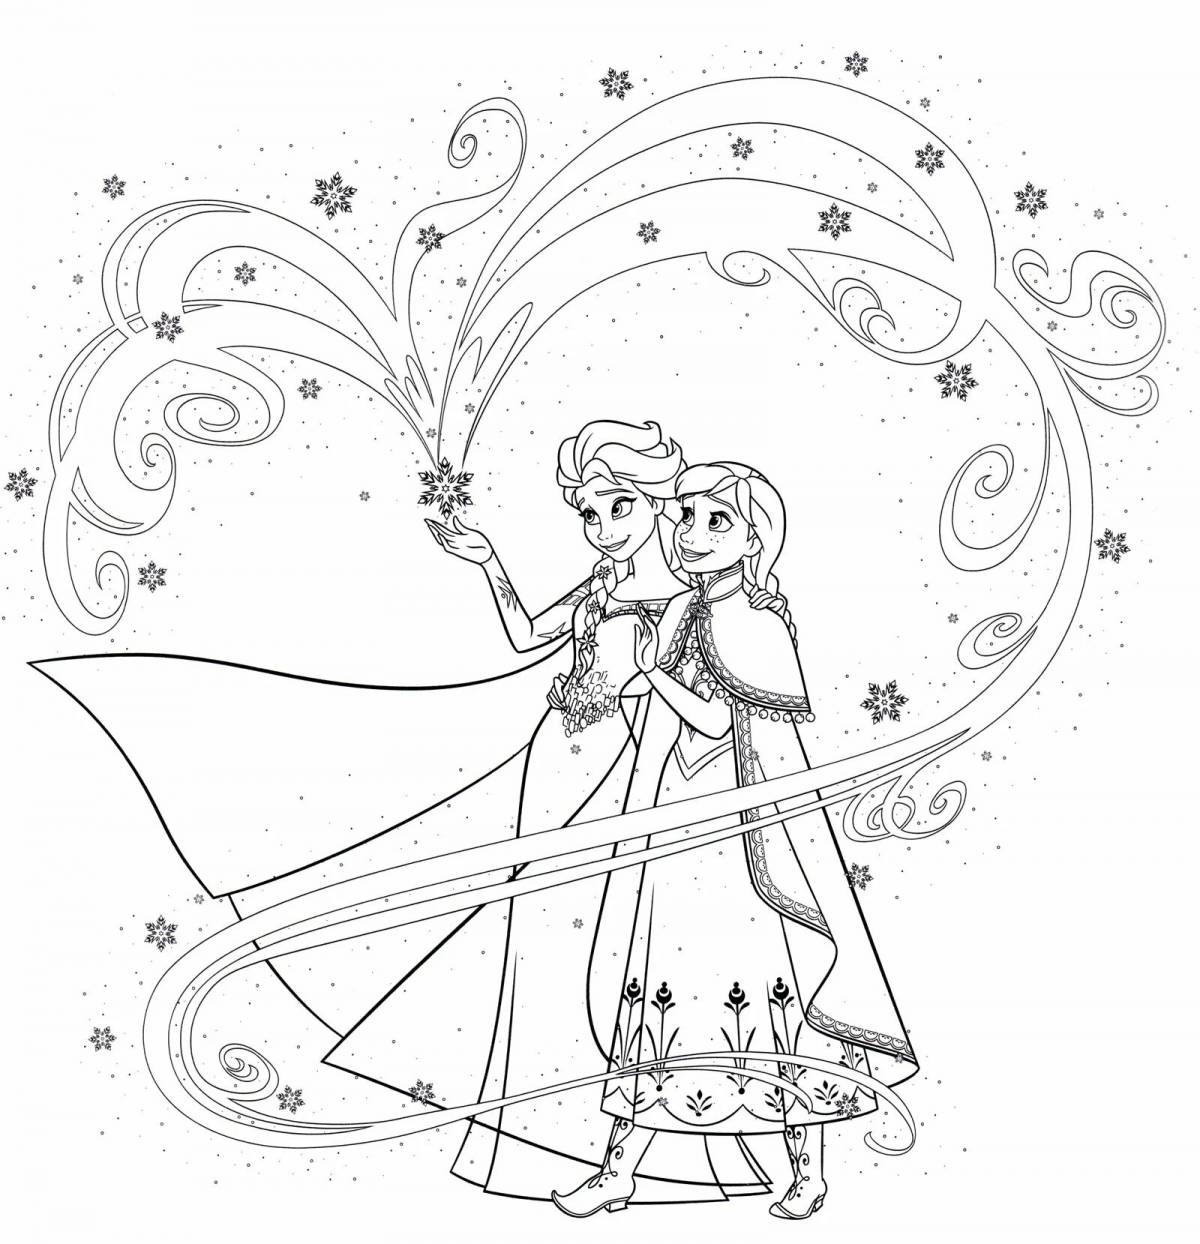 Elsa's Exalted Castle Coloring Page